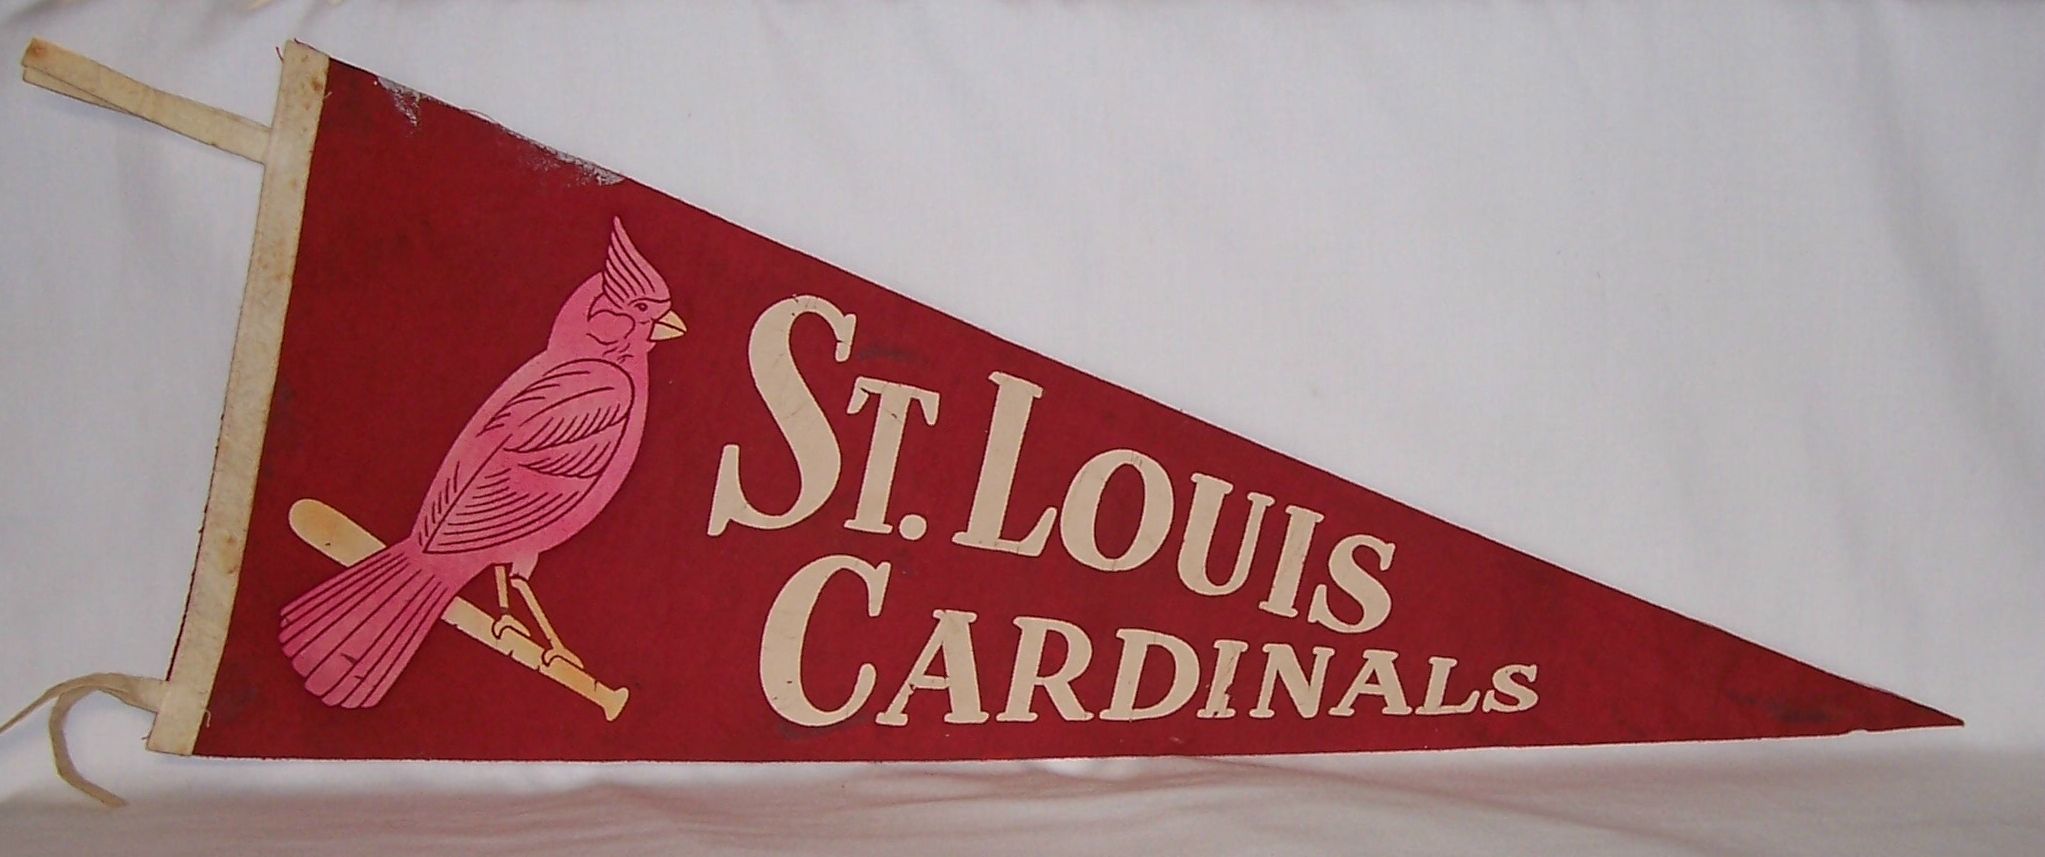 St. Louis Cardinals Flags your St. Louis Cardinal Flags, Banners, Pennants,  and Decorations Source